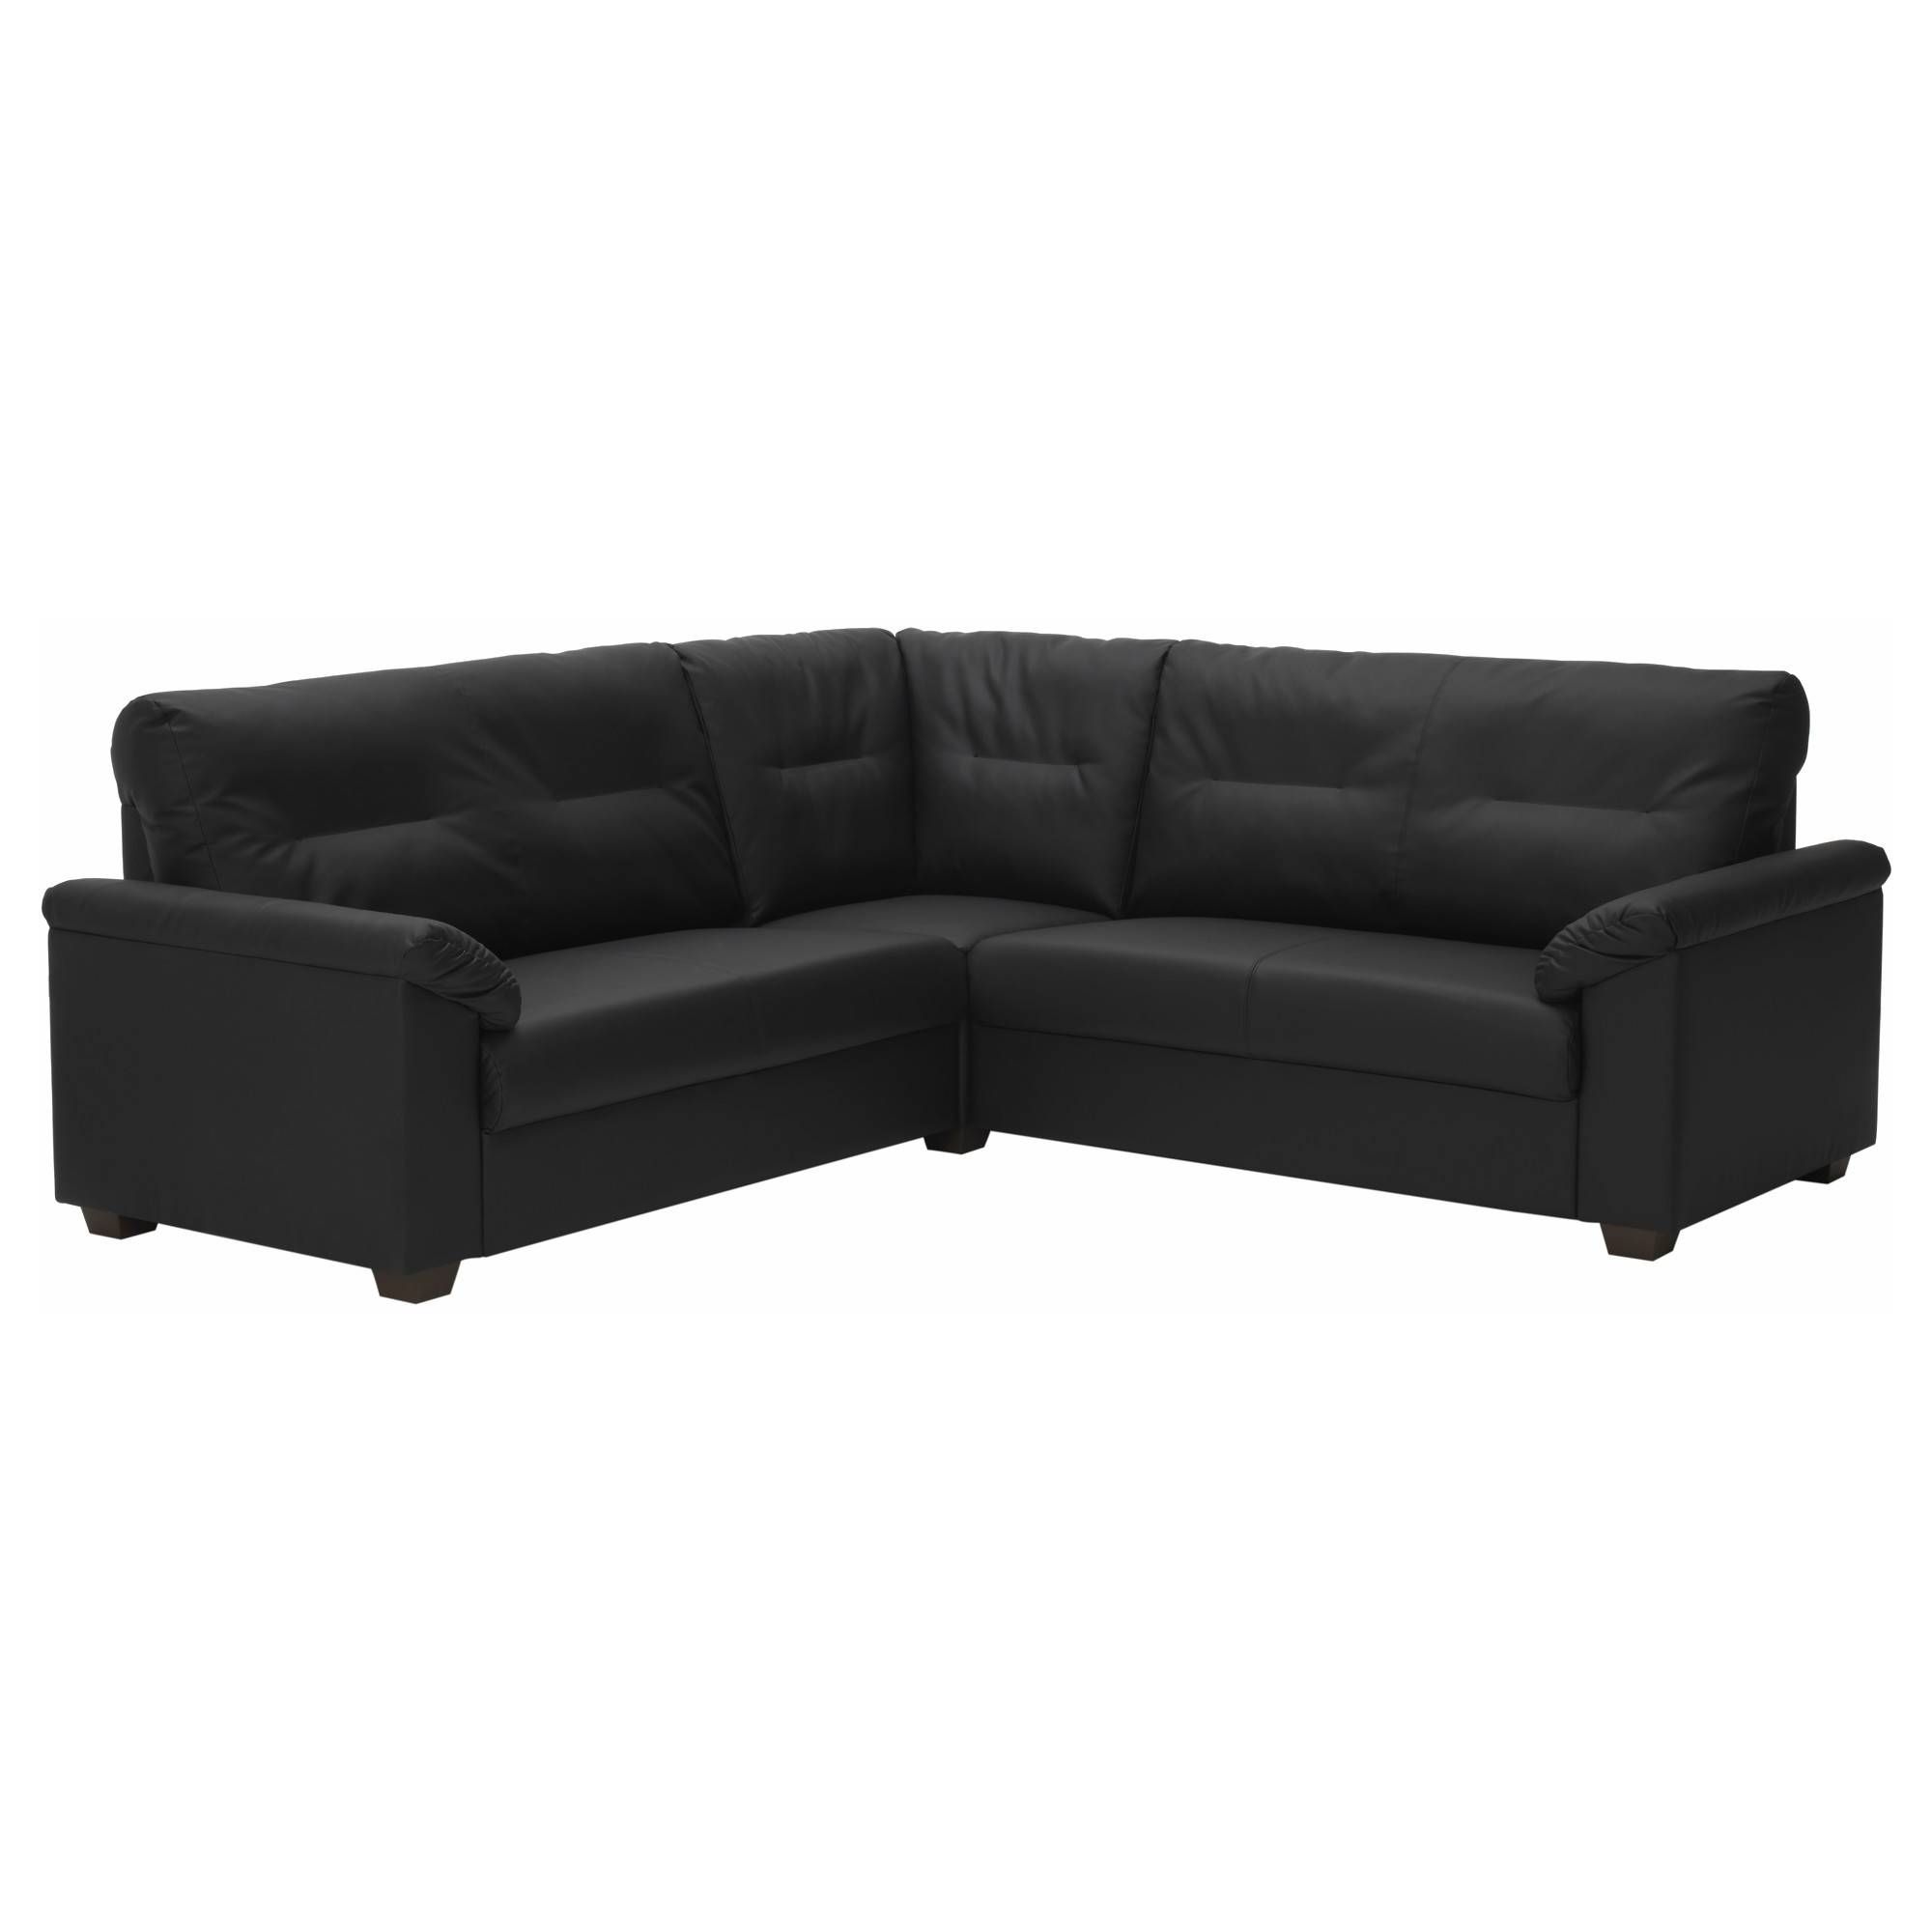 Sofas Center : Black Sectional Sofa Cheap Under With Recliners Throughout Cheap Black Sofas (View 22 of 30)